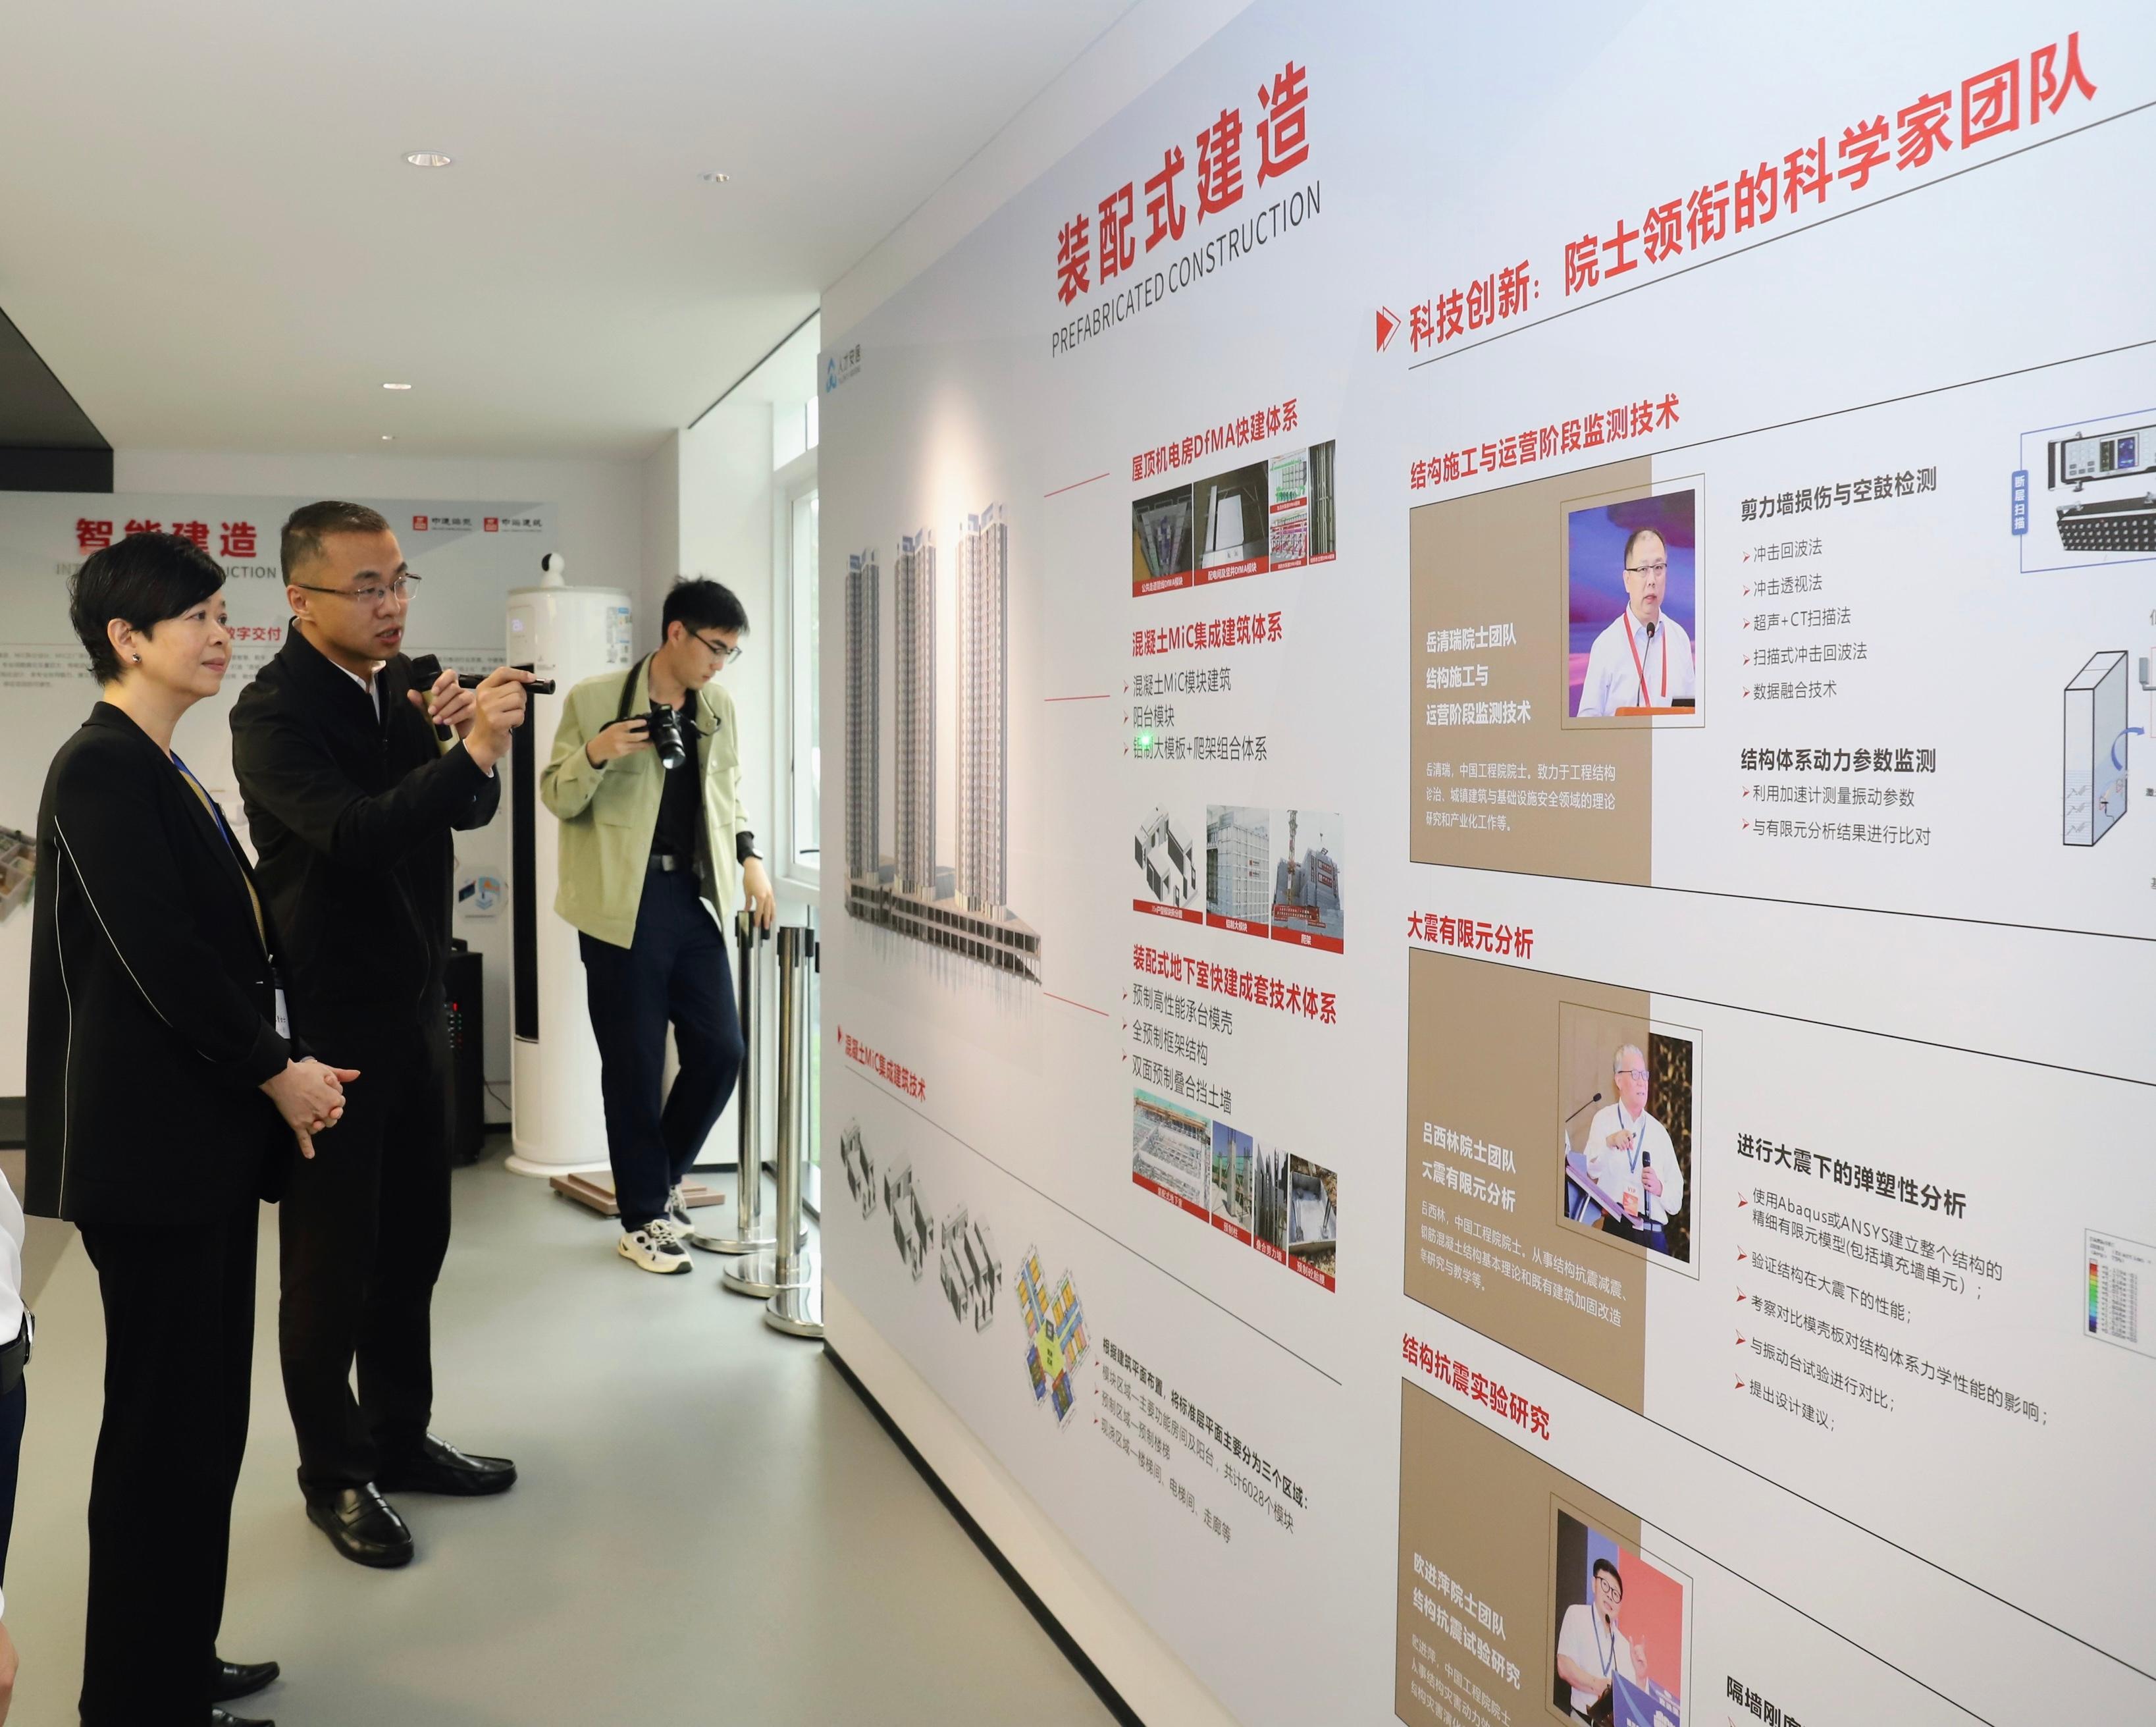 The Secretary for Housing, Ms Winnie Ho, led representatives of the Housing Bureau, the Housing Department and the Architectural Services Department to Shenzhen today (April 3). Photo shows Ms Ho (left) visiting an indemnificatory housing project in Zhangkeng, Longhua District, and being briefed on the project which was built expeditiously by adopting the Modular Integrated Construction method as a concrete construction approach.